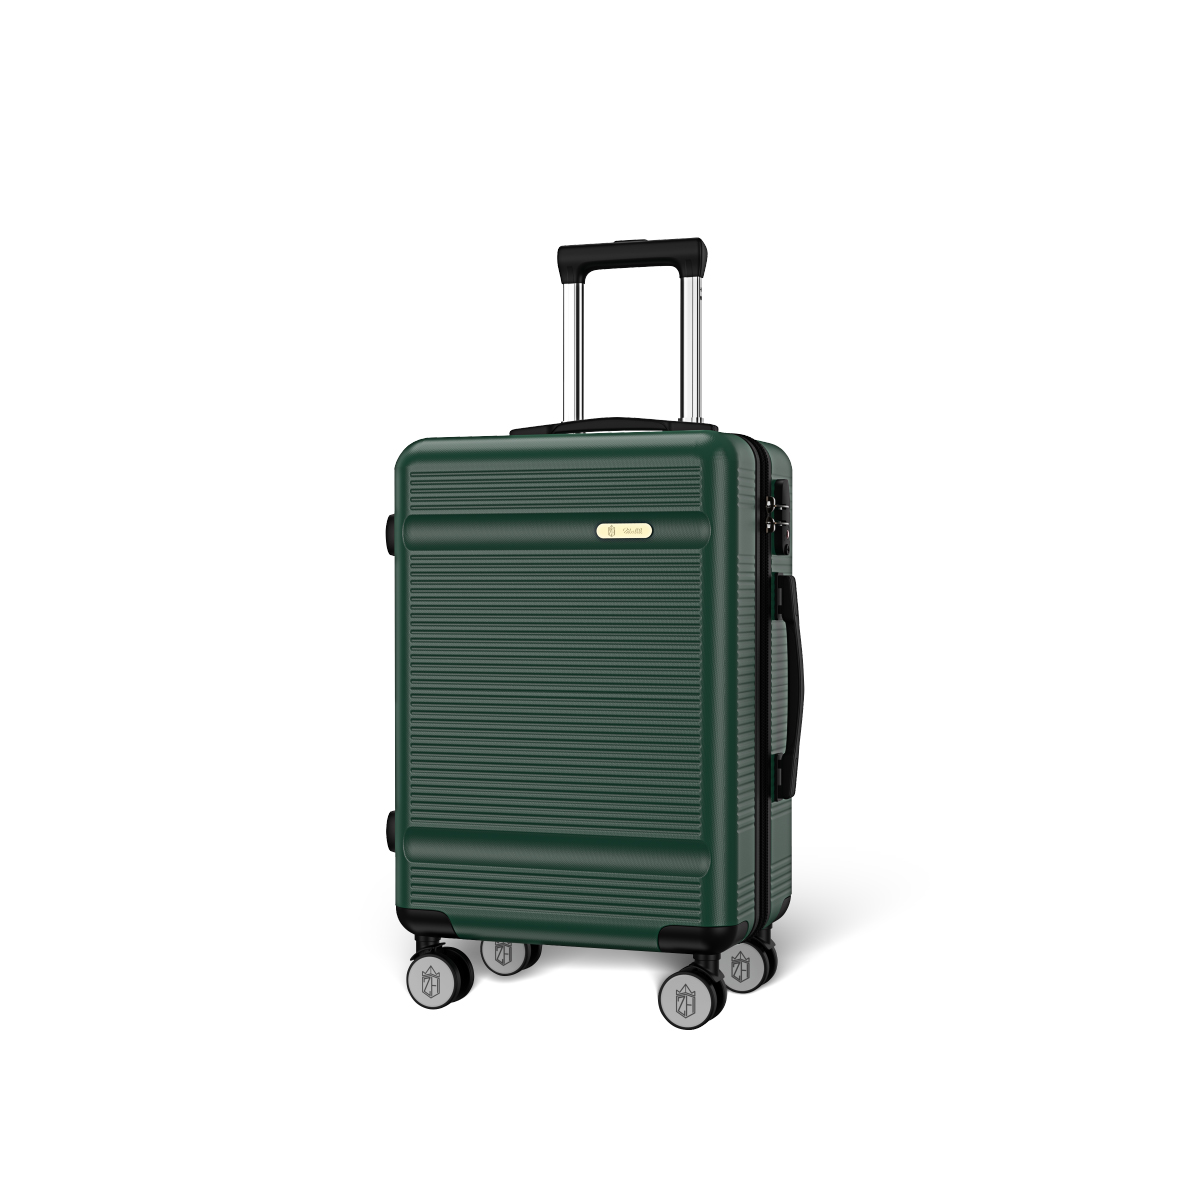 TrekMate Luggage 20 Inch